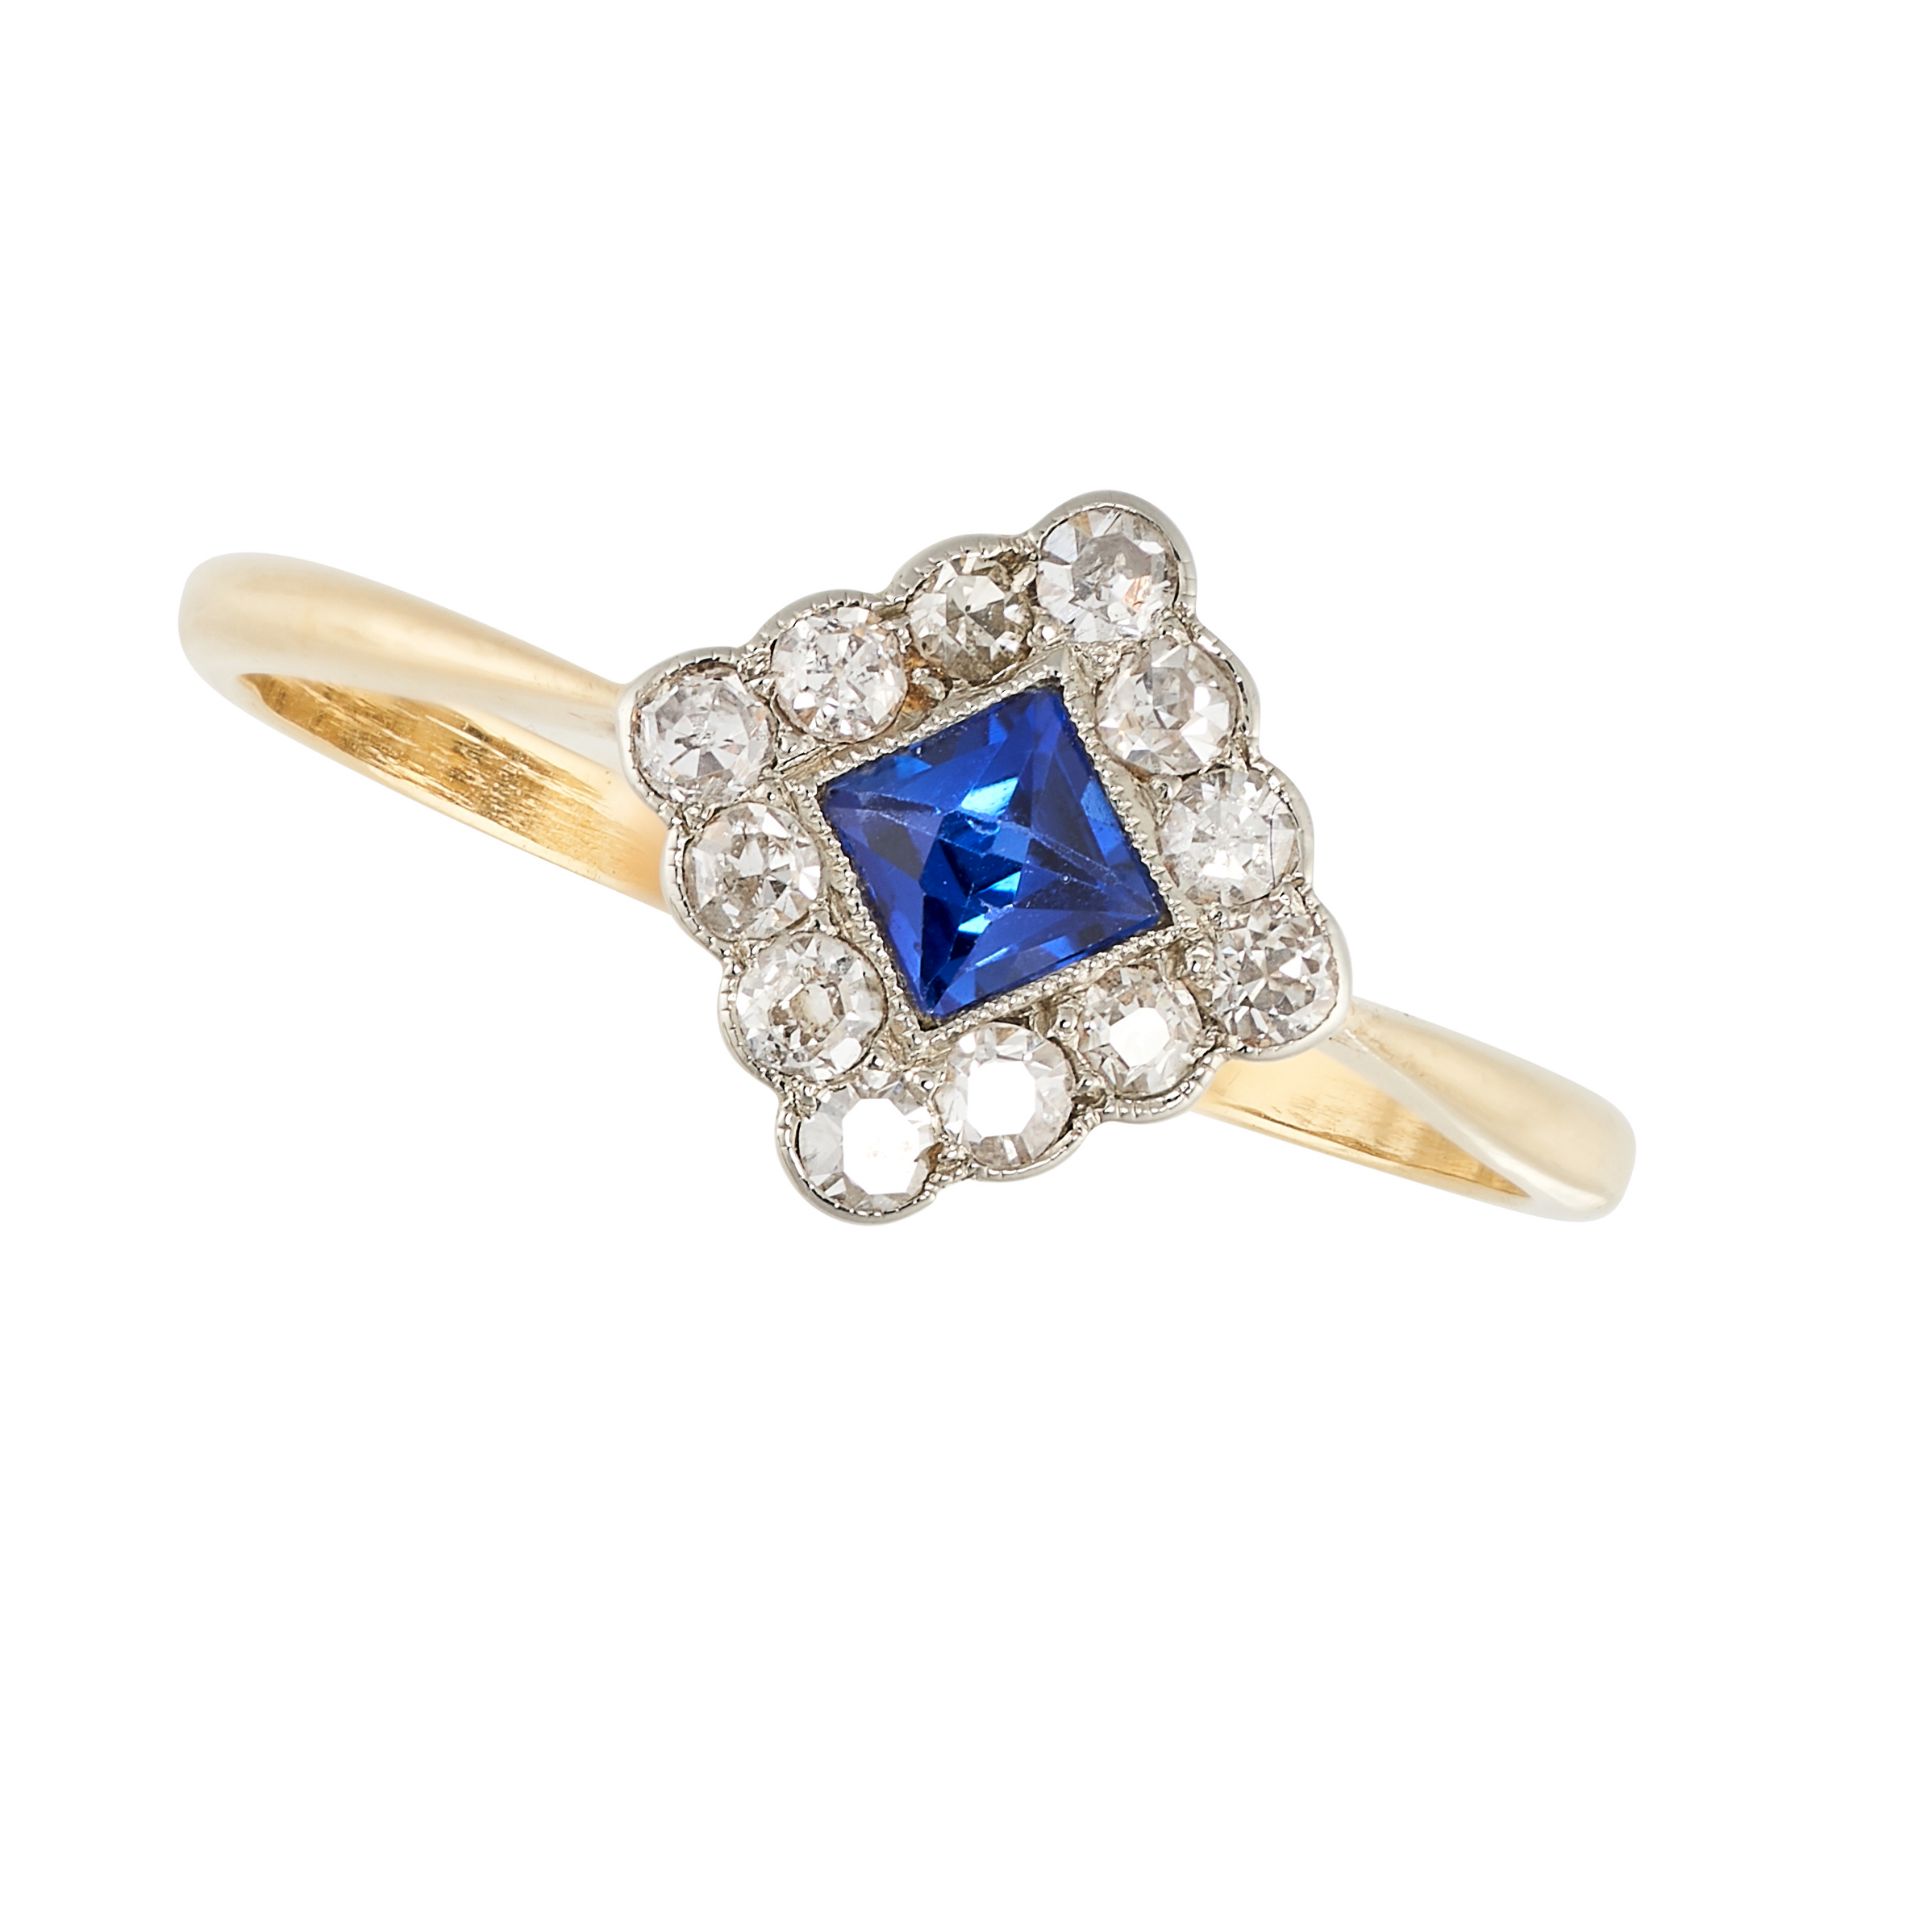 NO RESERVE - AN ART DECO SAPPHIRE AND DIAMOND RING in 18ct yellow gold and platinum, the face set